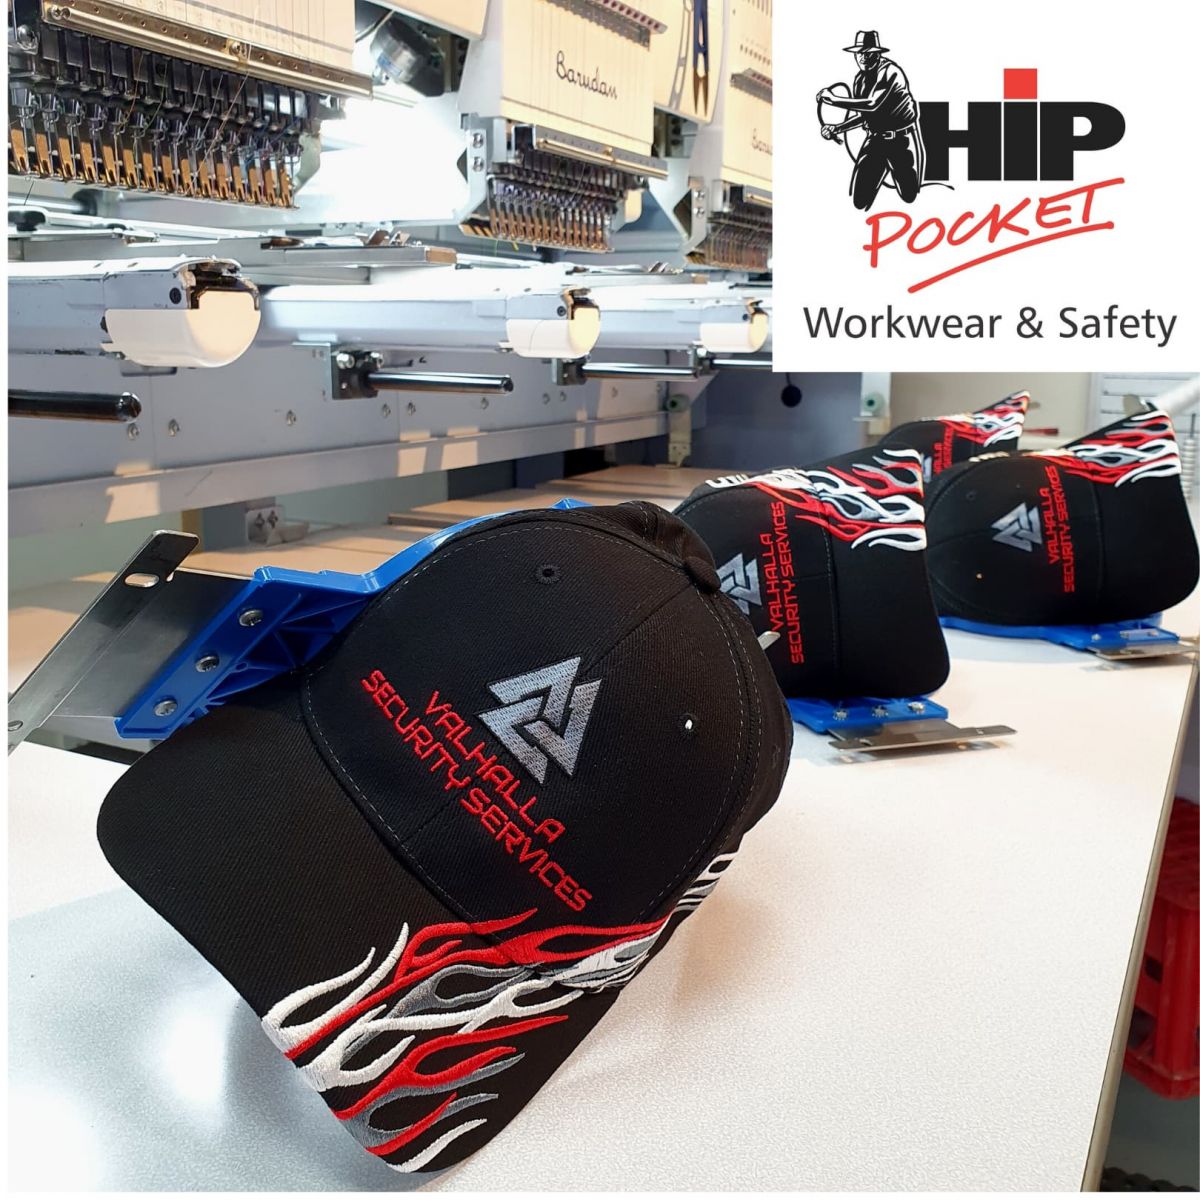 embroided cap - hip pocket workwear & safety toowoomba